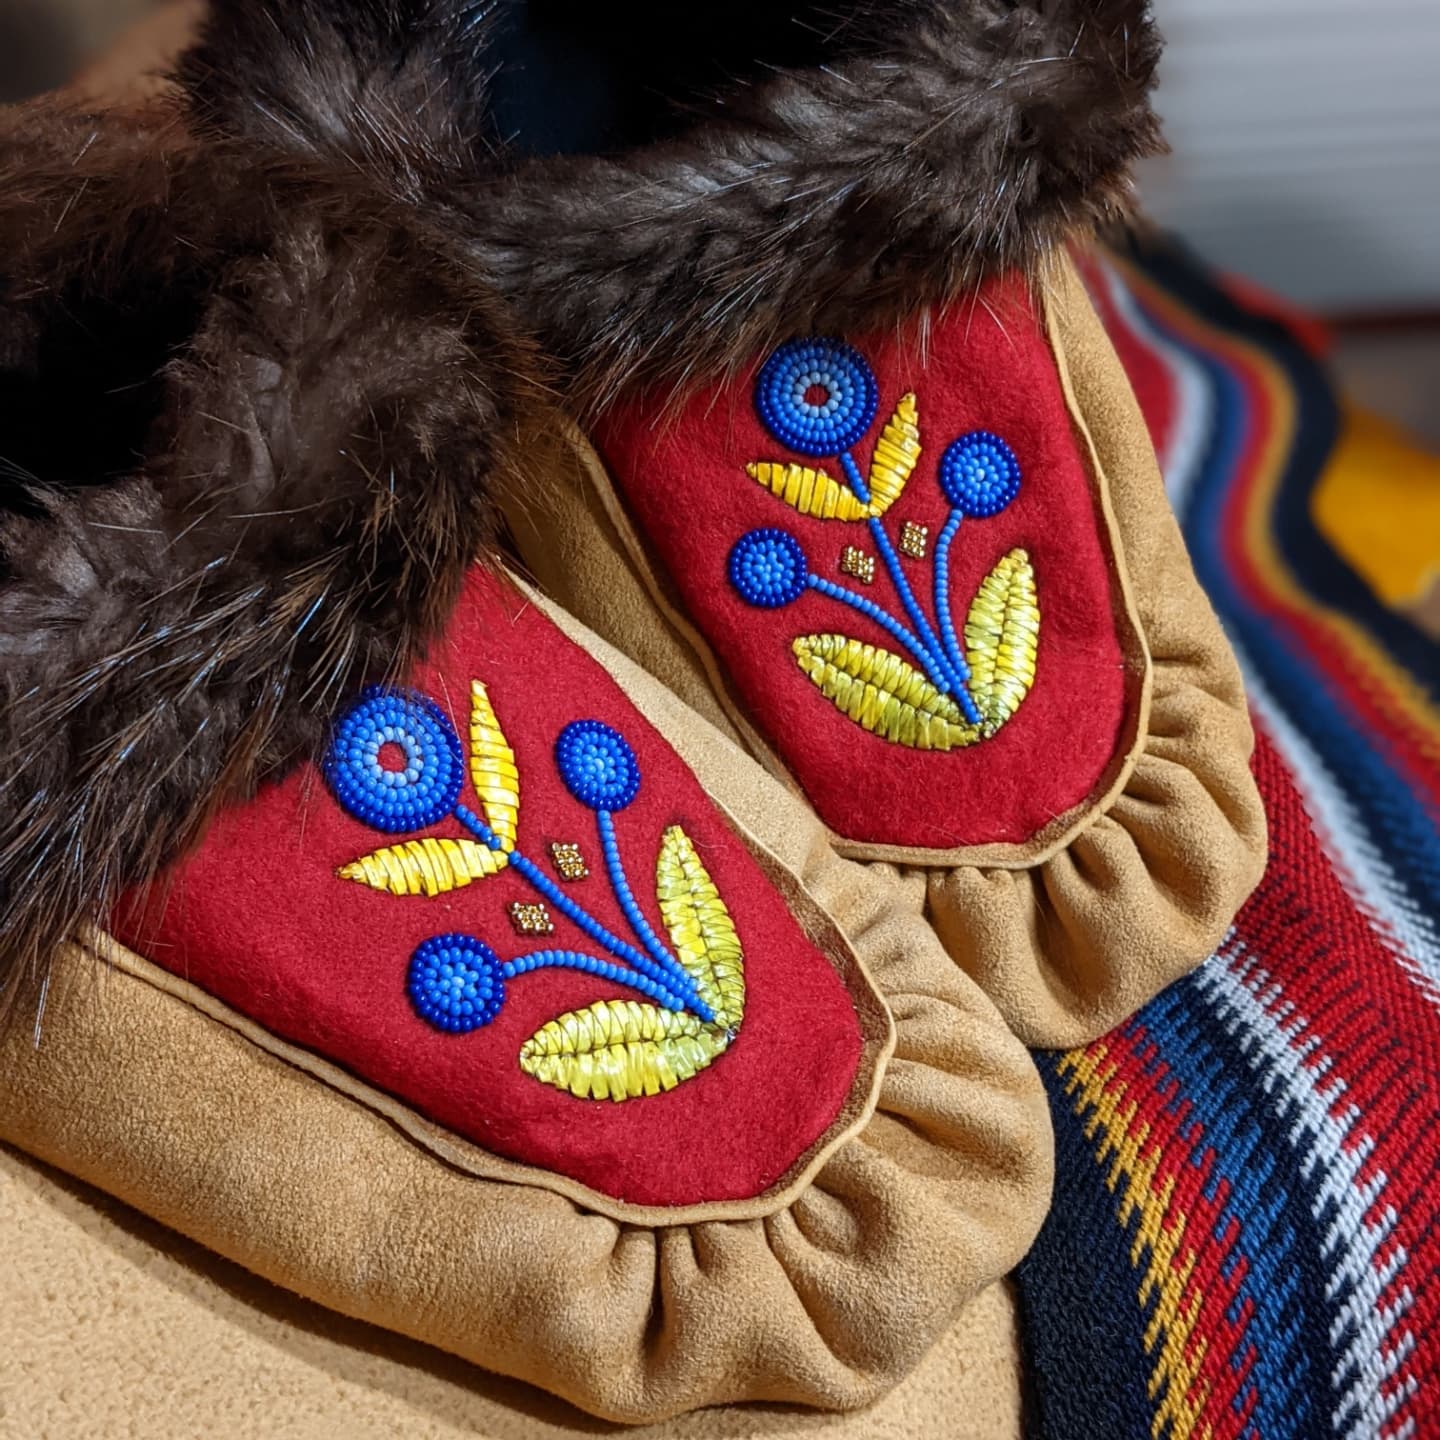 Kaija Heitland, beadwork, quillwork, moccasins, fabric design, classes, beadwork kits, teaching, traditional skills sharing, workshop facilitator, Indigenous Artist, First Nations, Indigenous Arts Collective of Canada, Pass The Feather